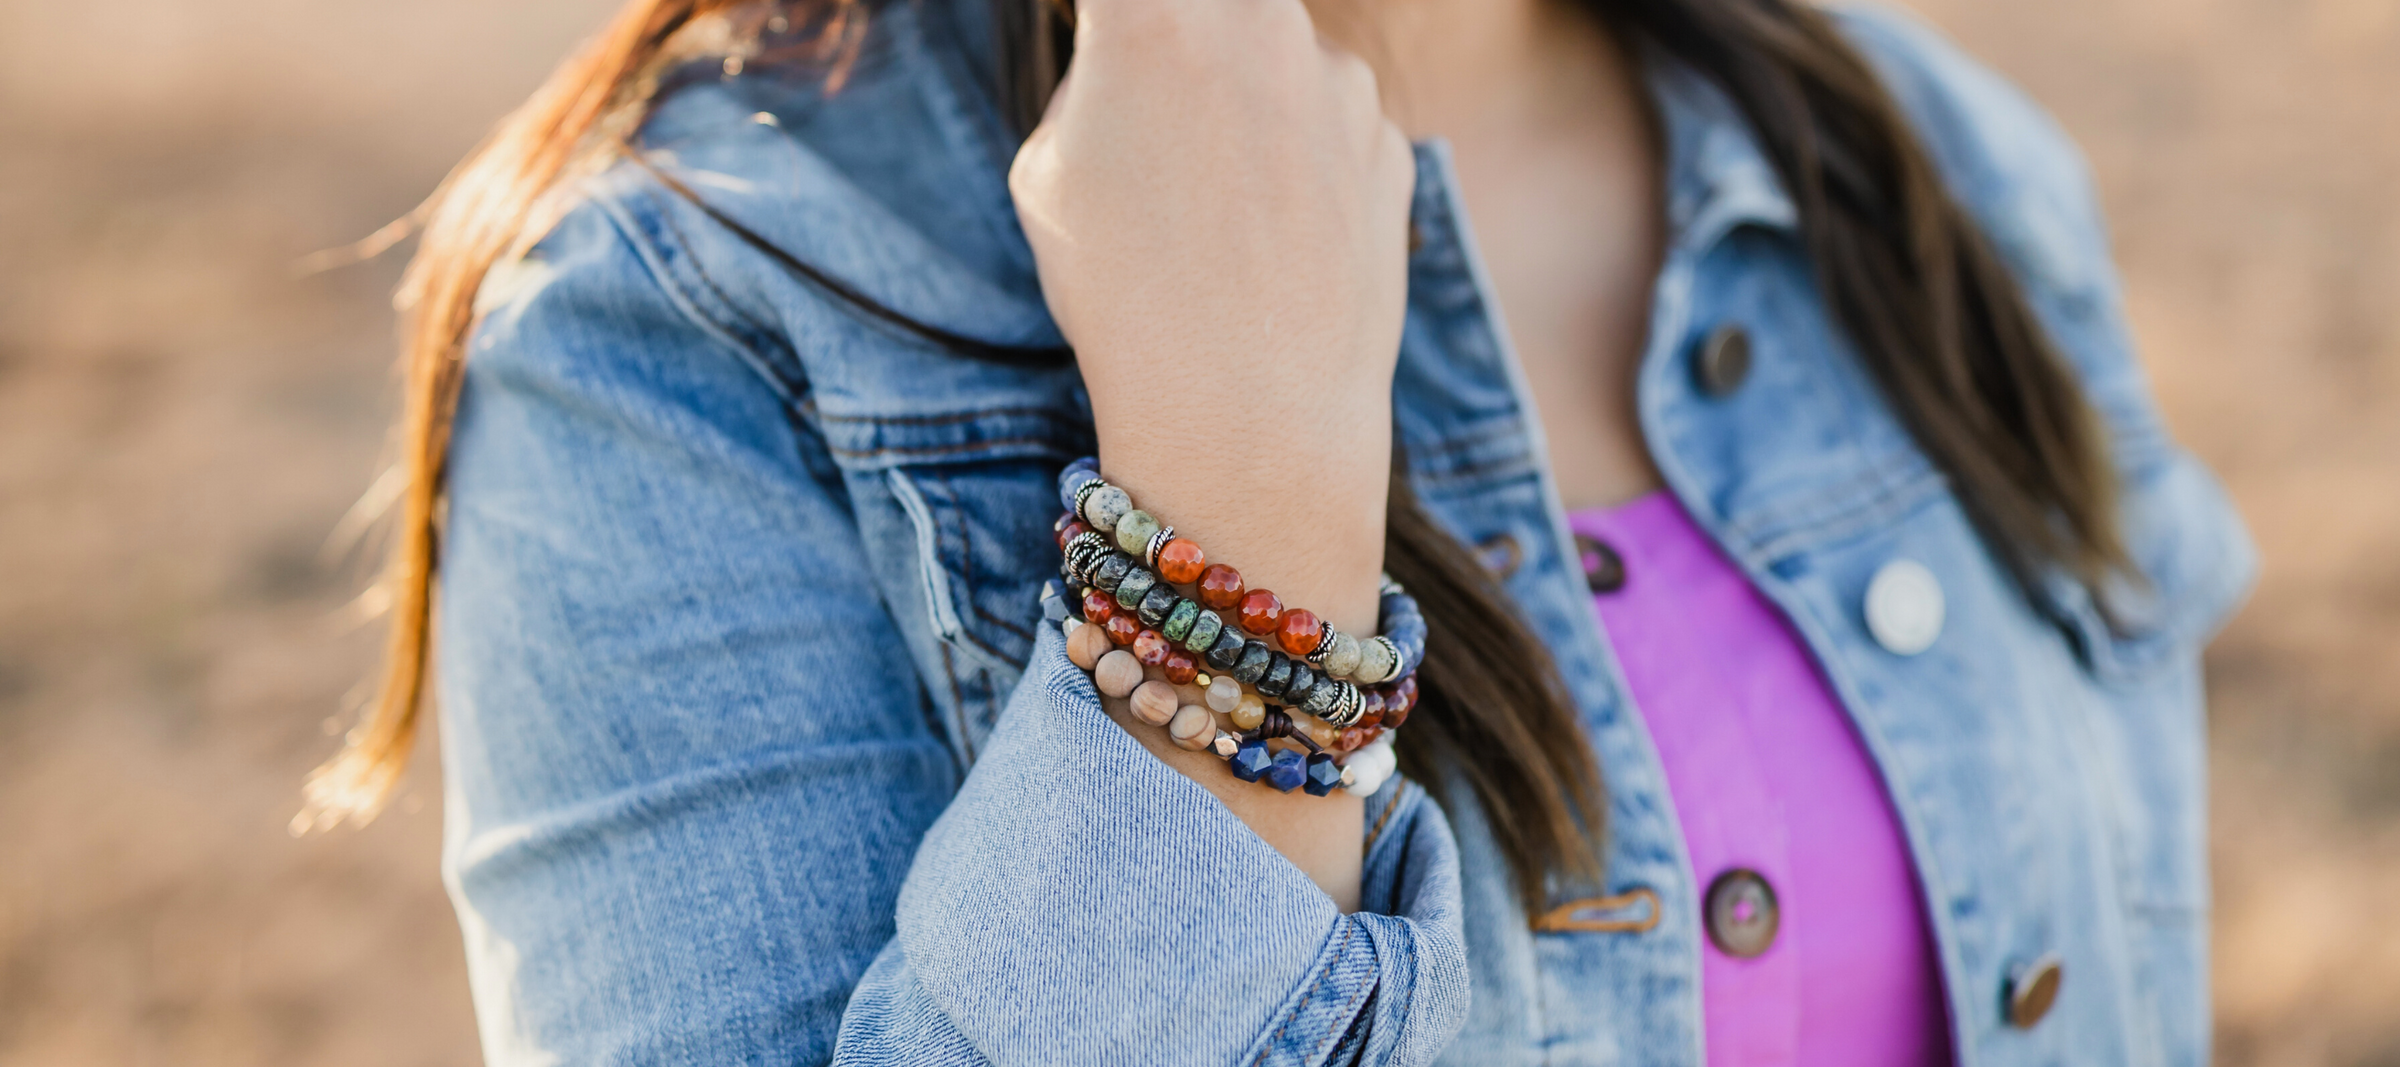 Everyday inspirational stack bracelets, meaningful gifts for women